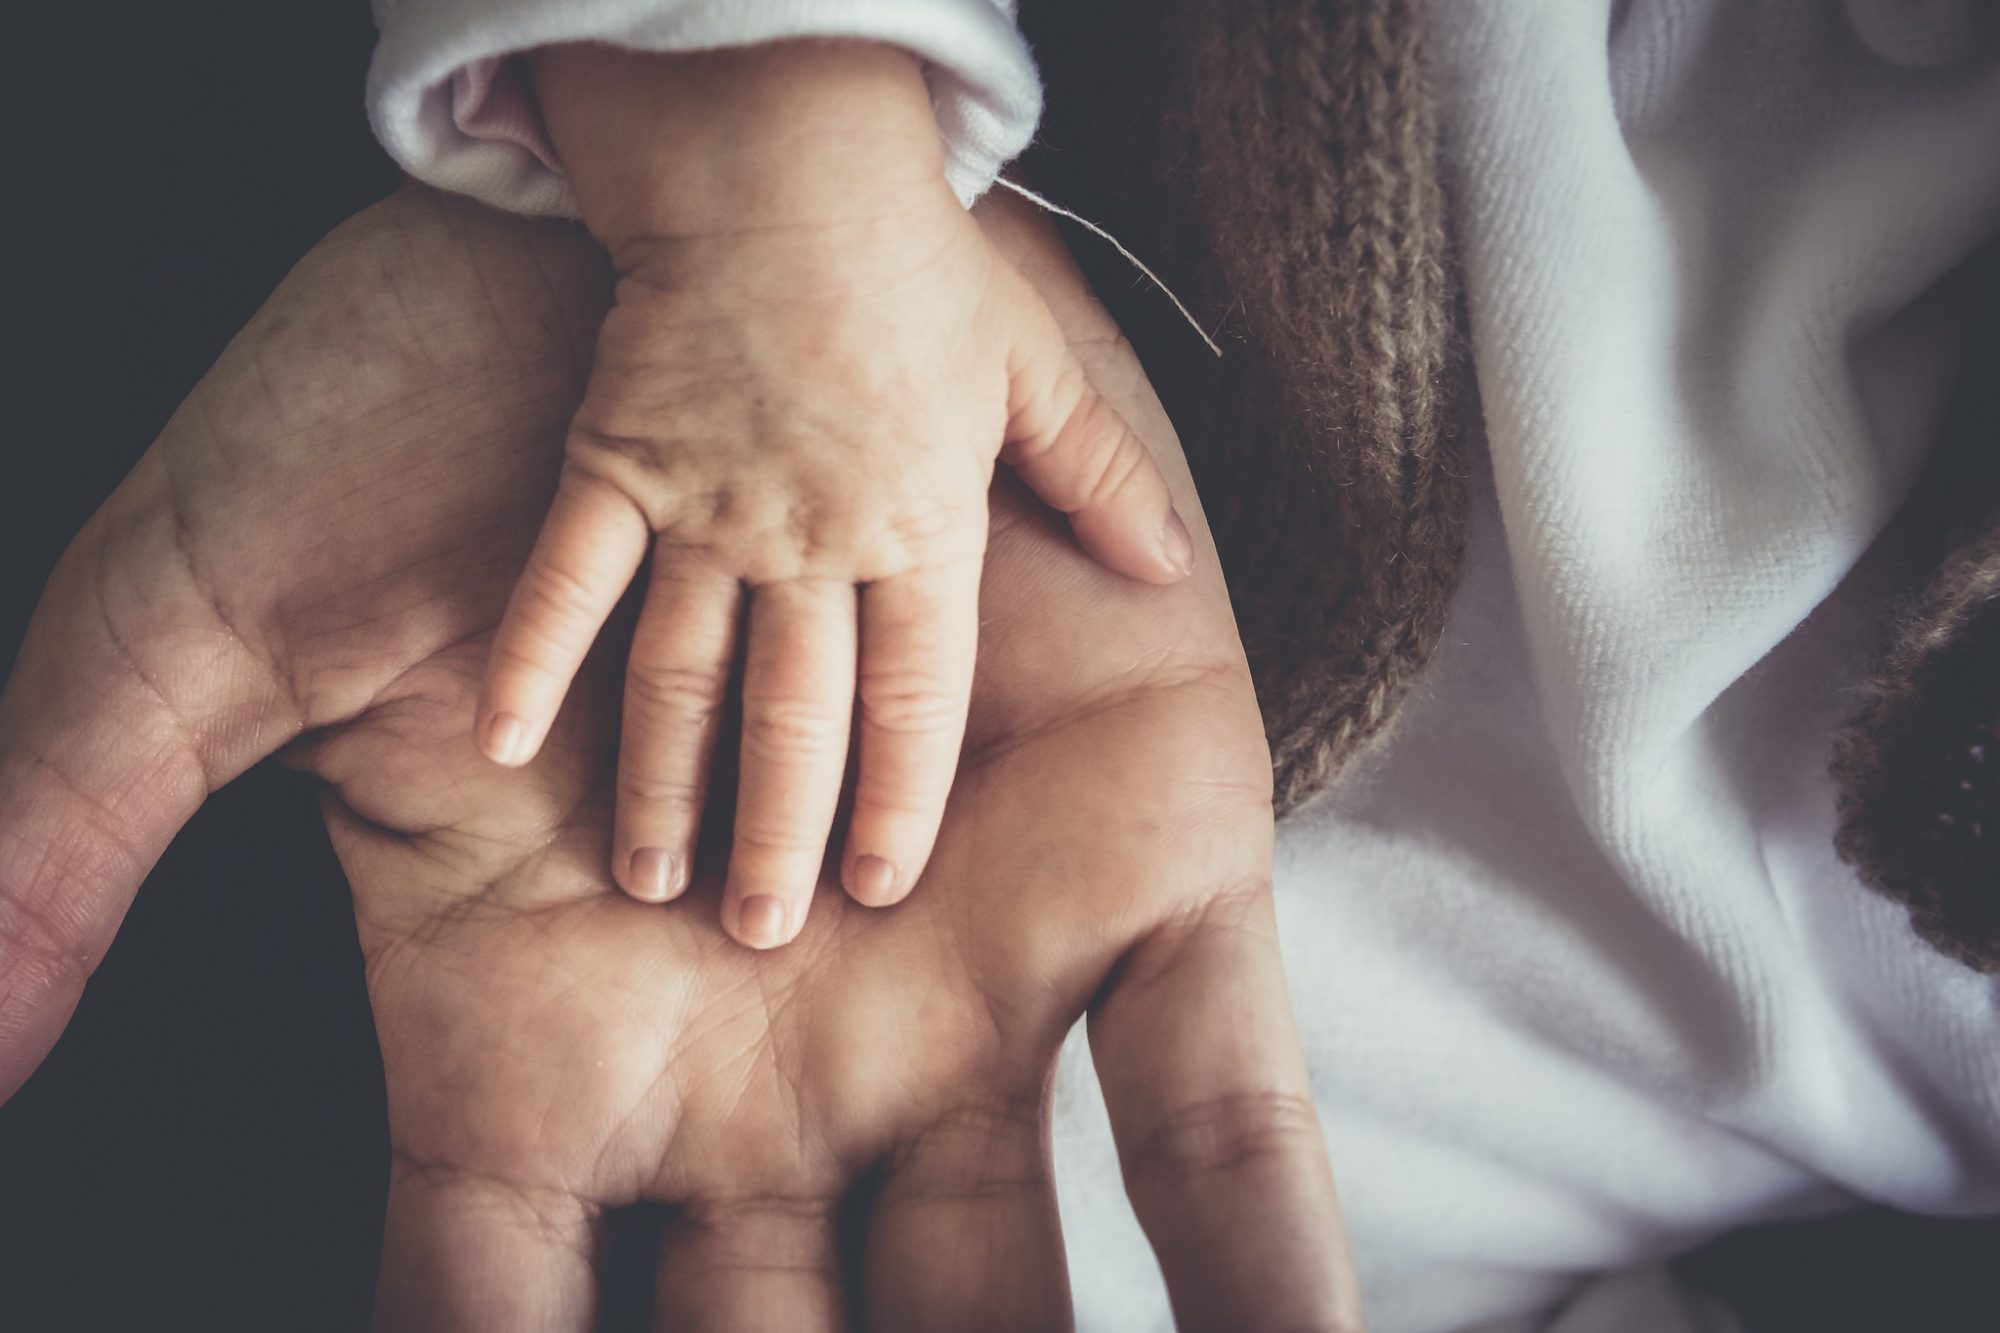 Heartfelt image of baby's hand on top of an adult male's hand